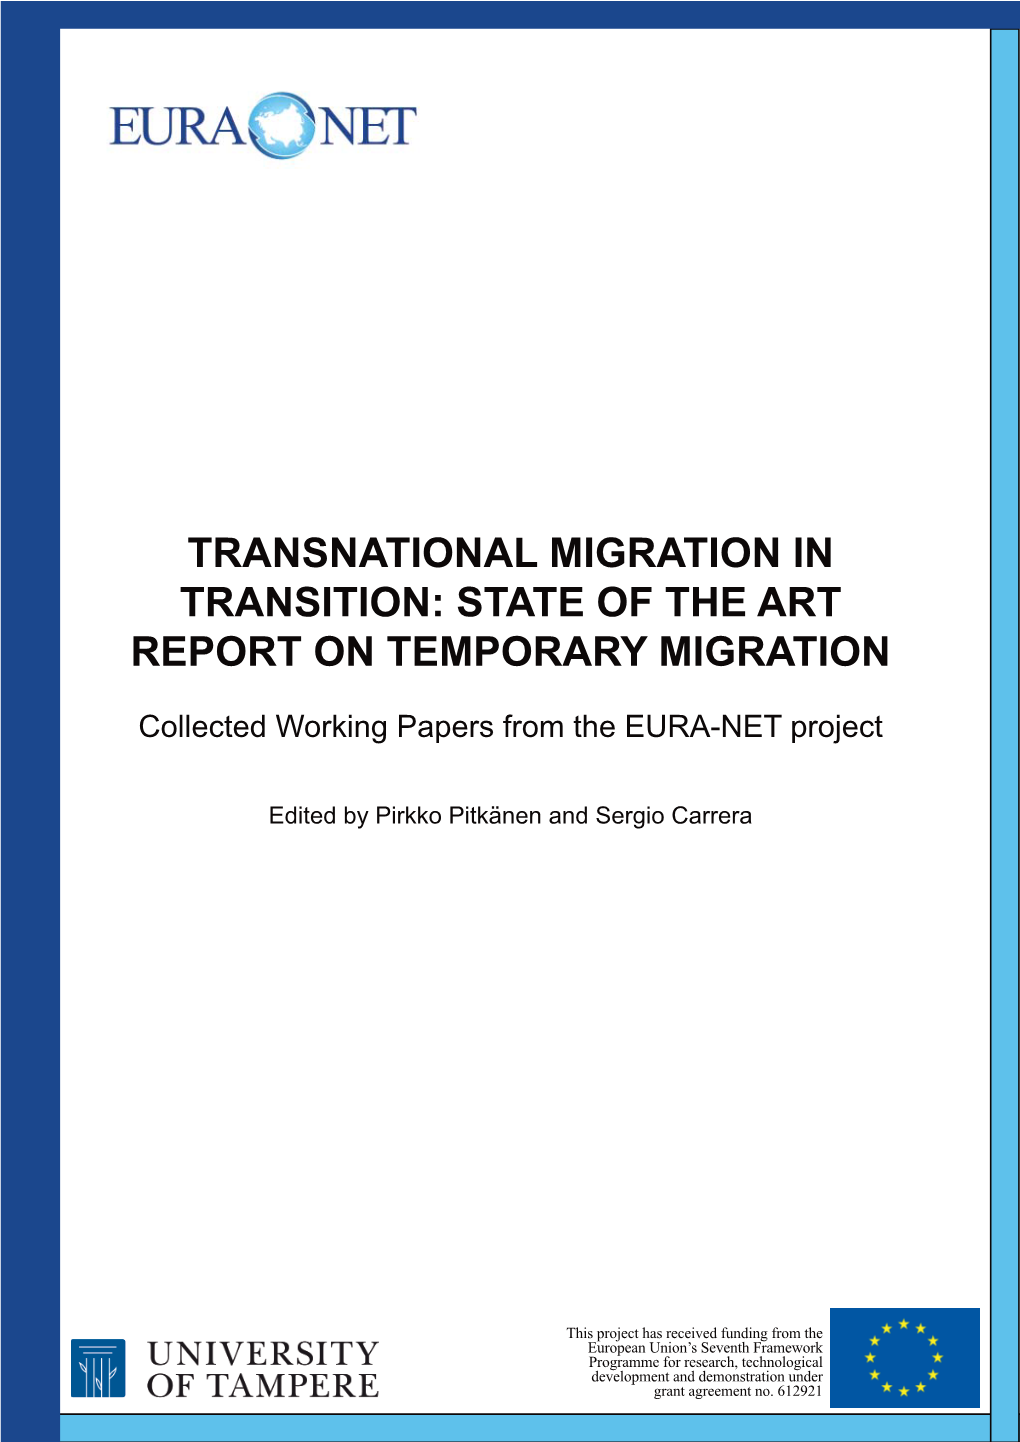 State of the Art Report on Temporary Migration